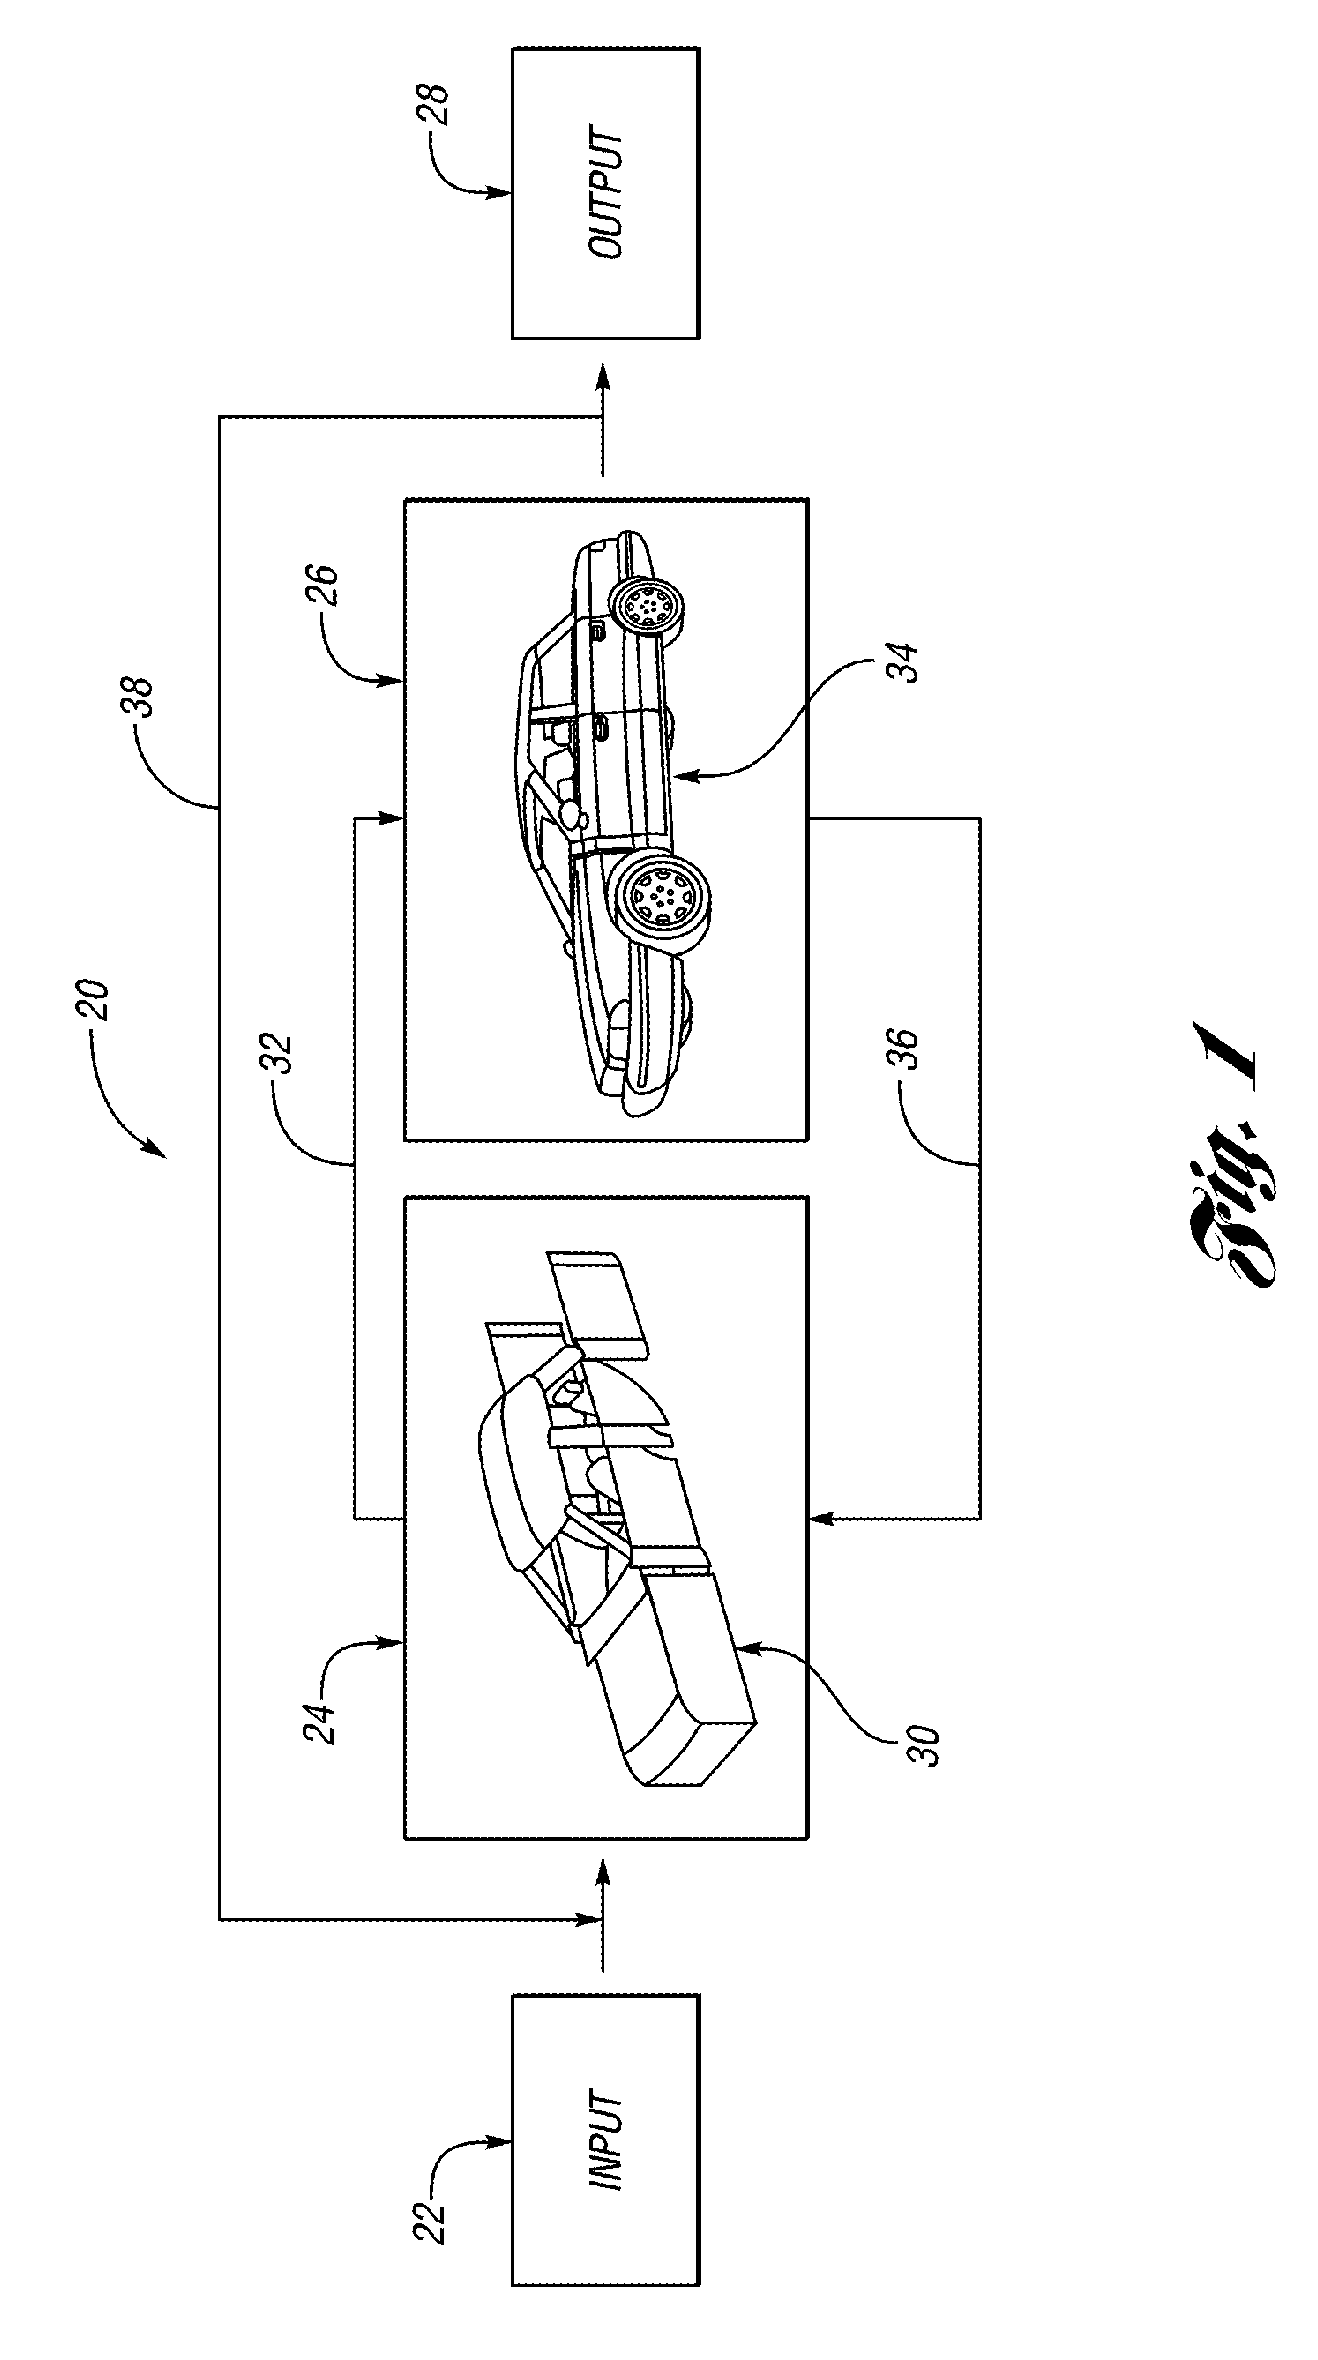 Method and system for developing a vehicle package